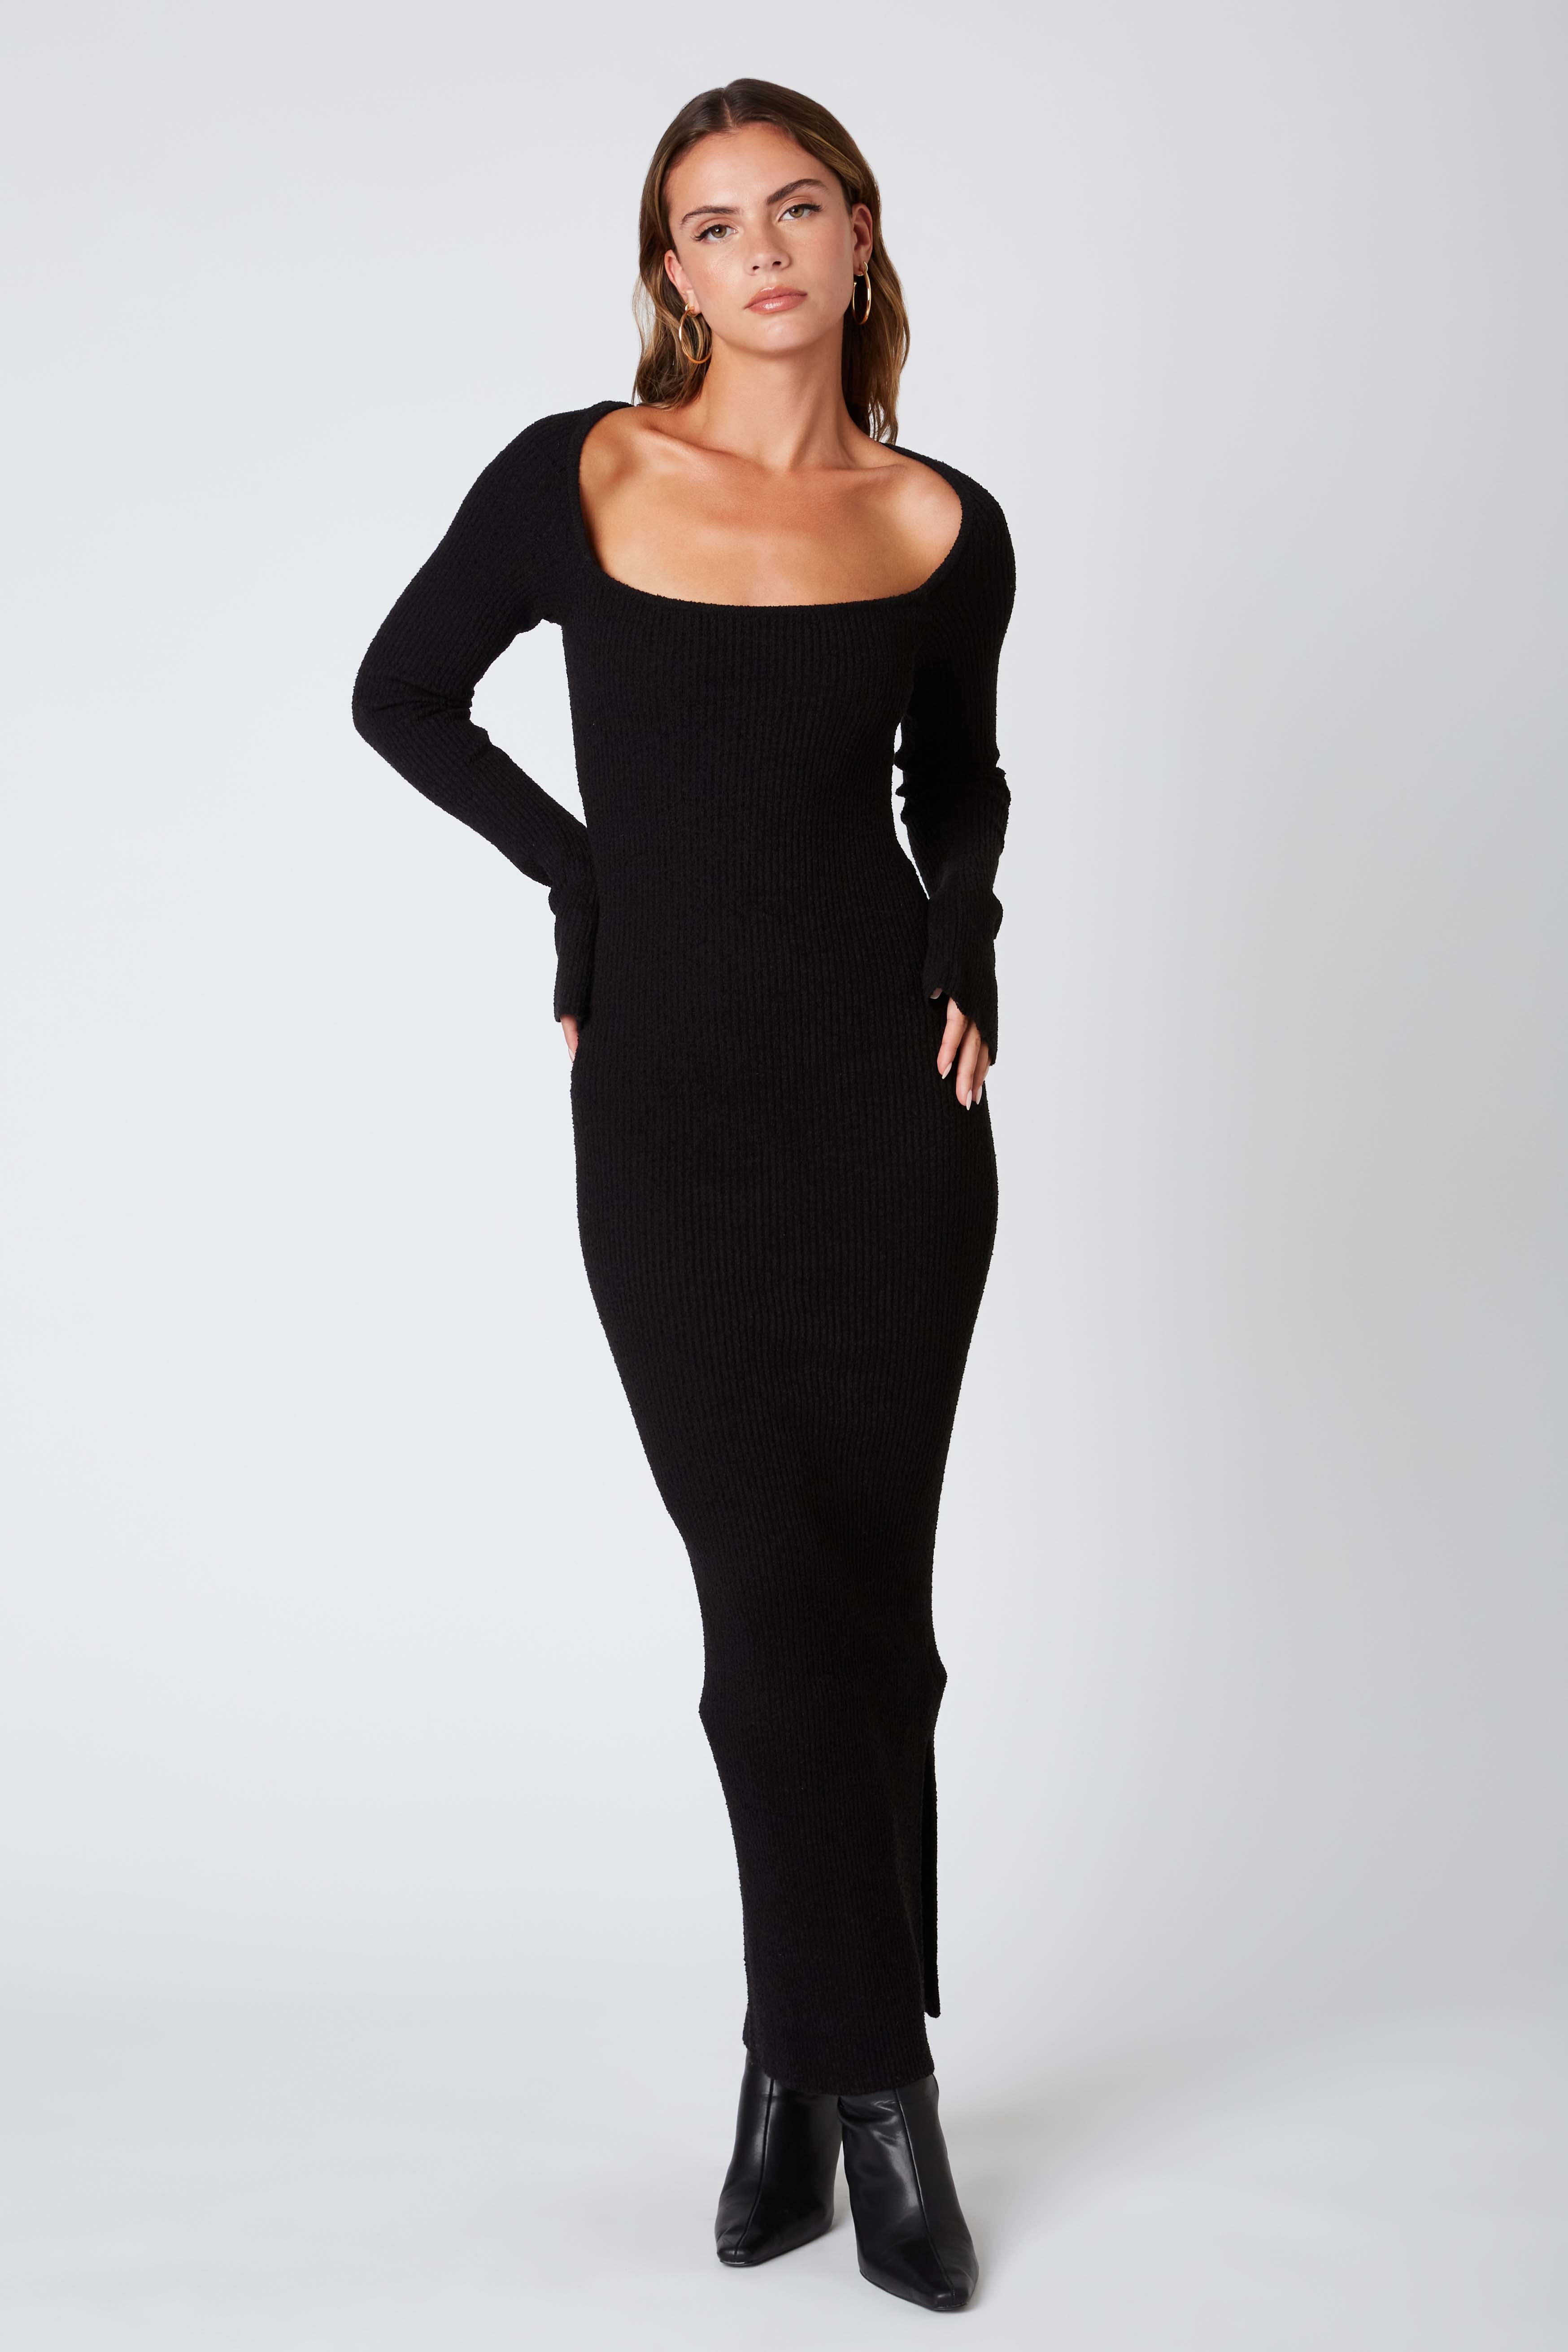 Knit Long Sleeve Maxi Dress in Black Front View